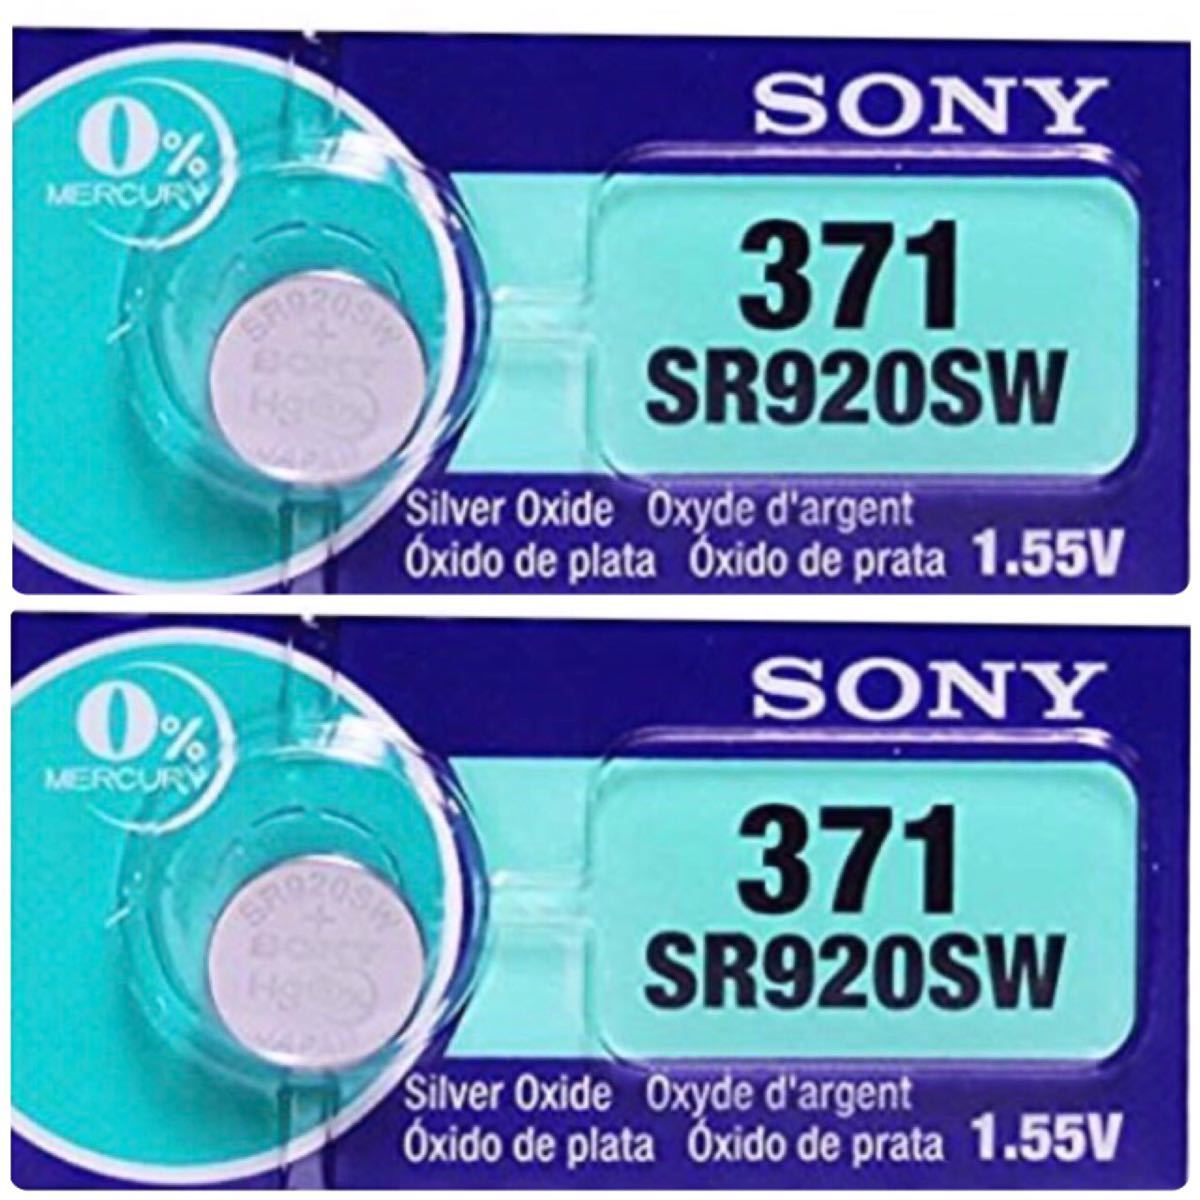 [ free shipping ]SONY acid . silver battery SR920SW 2 ps 2 piece set button battery battery 